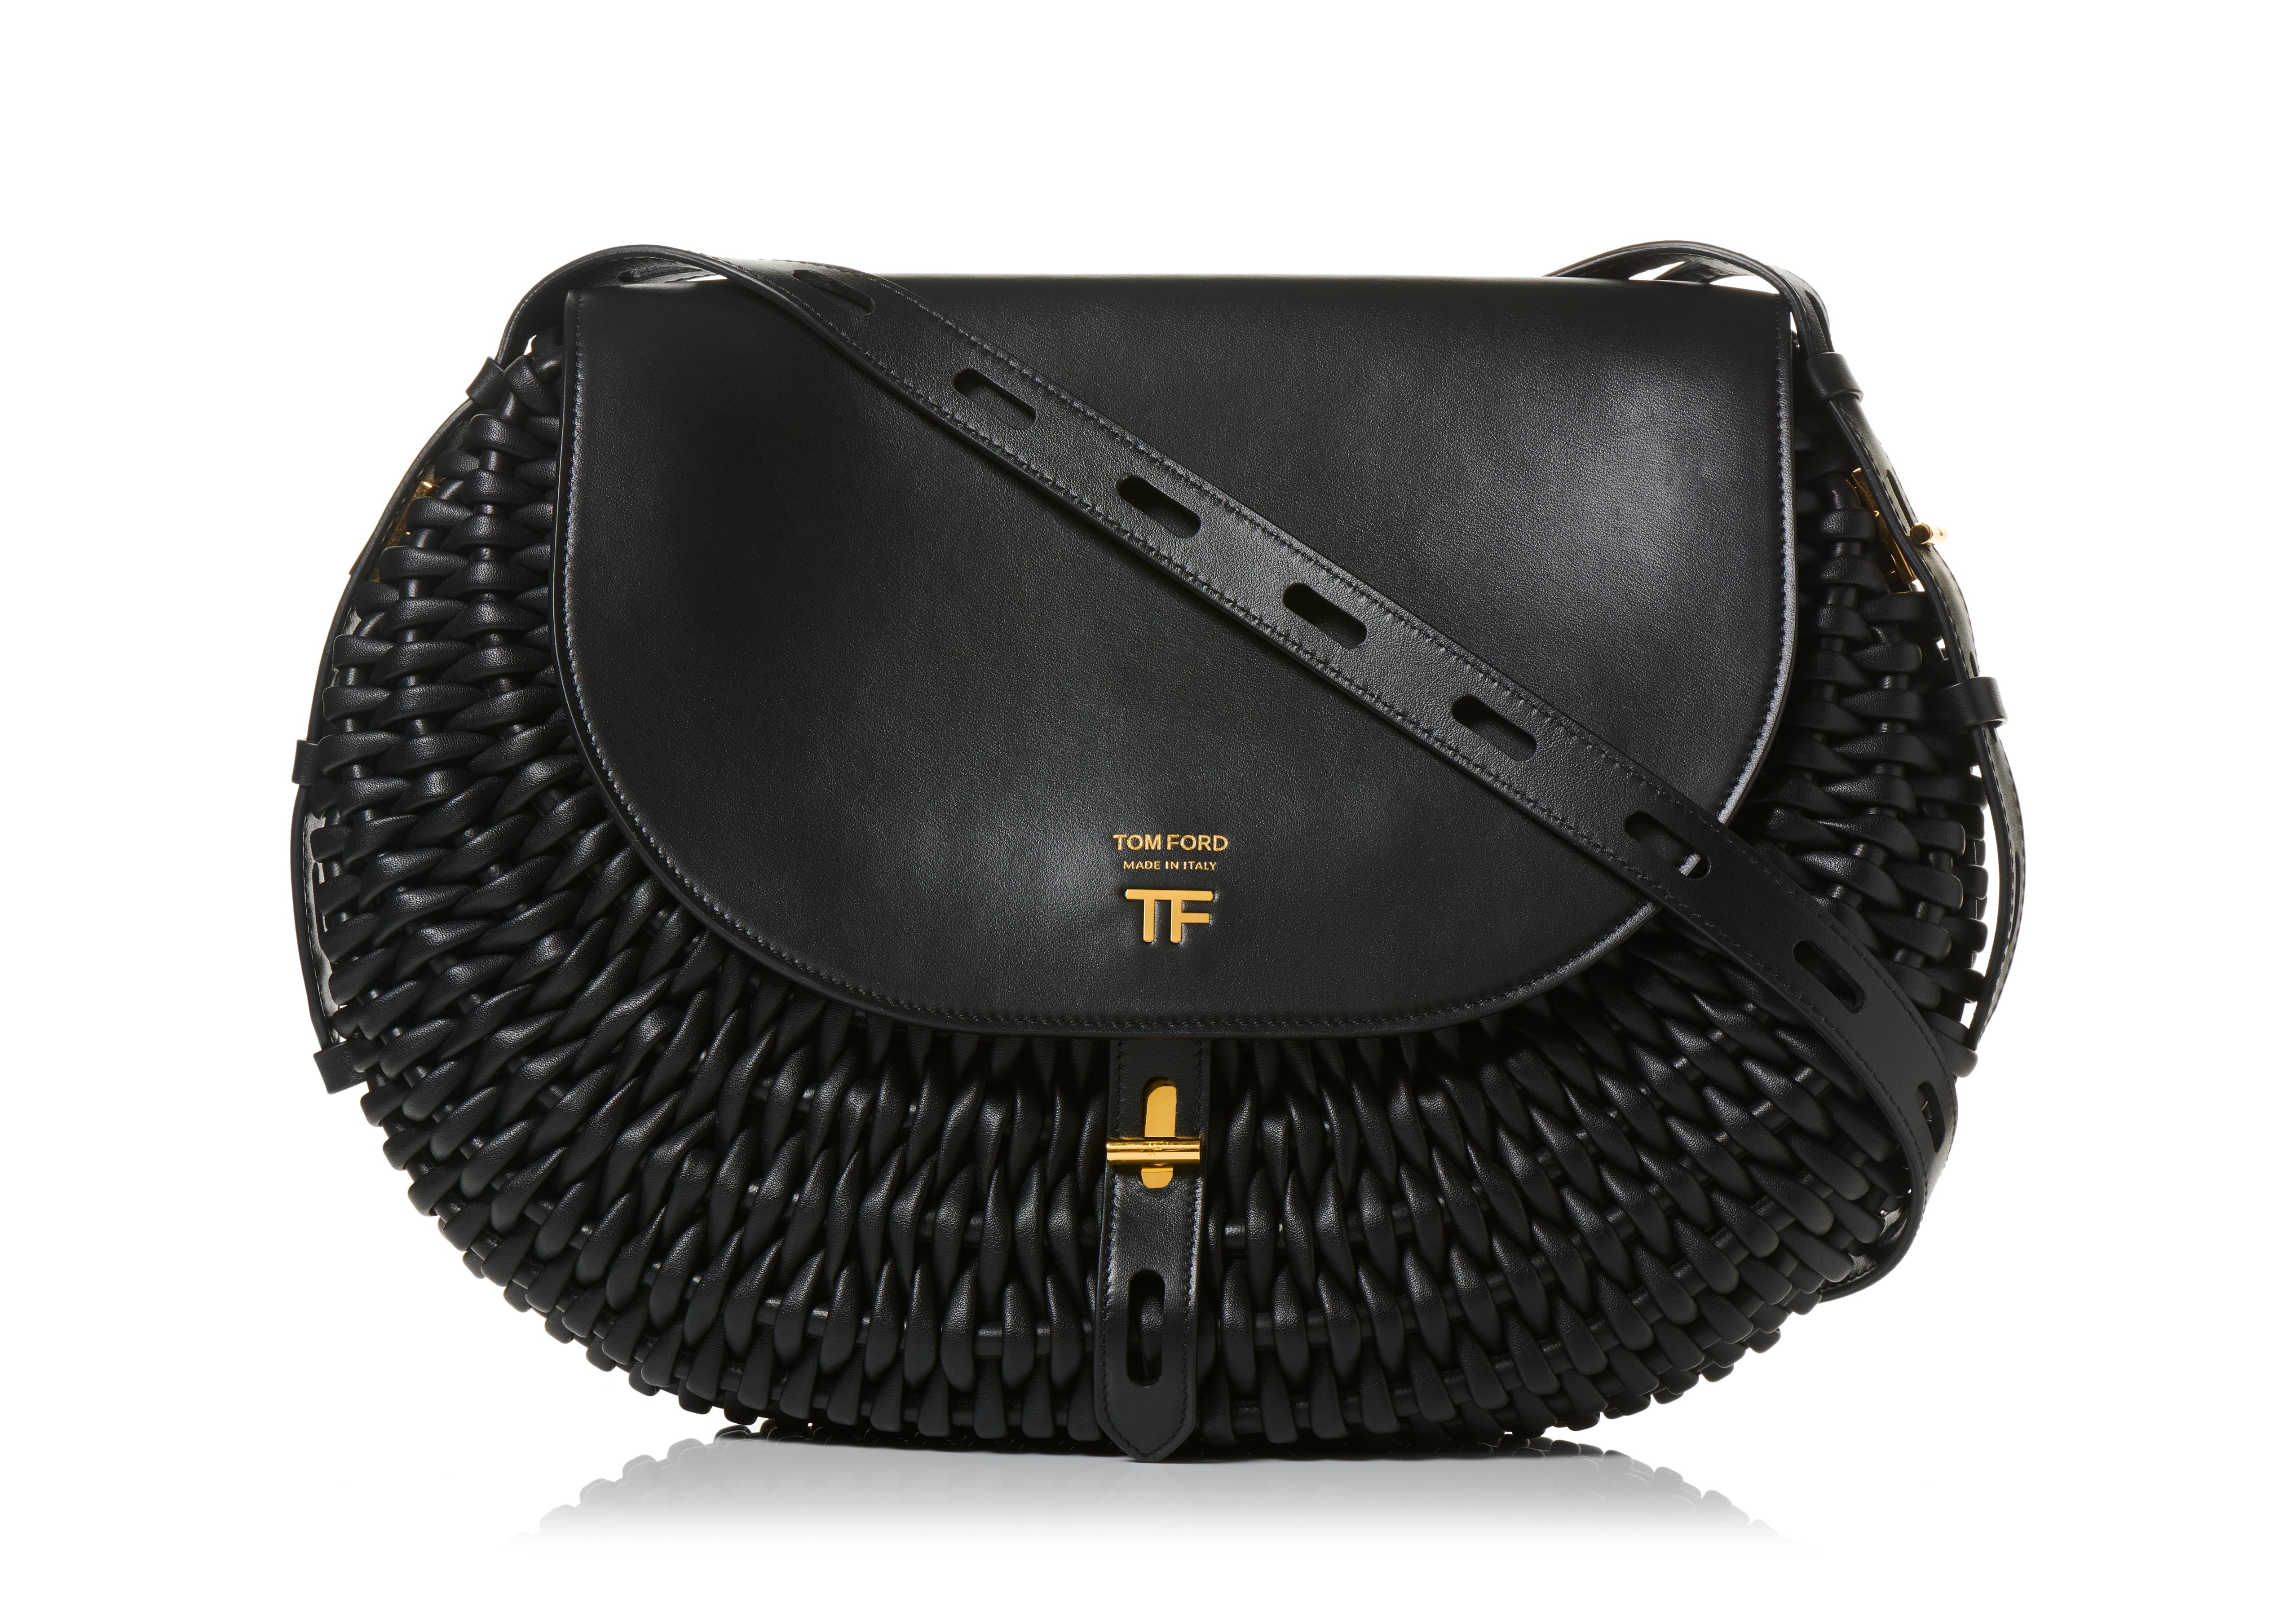 TOM FORD - The Hollywood Leather T Twist Small Top Handle Bag is designed  with a front pocket and signature T Twist hardware and strap.  tmfrd.co/TTwistSmallTopHandleBag #TOMFORD